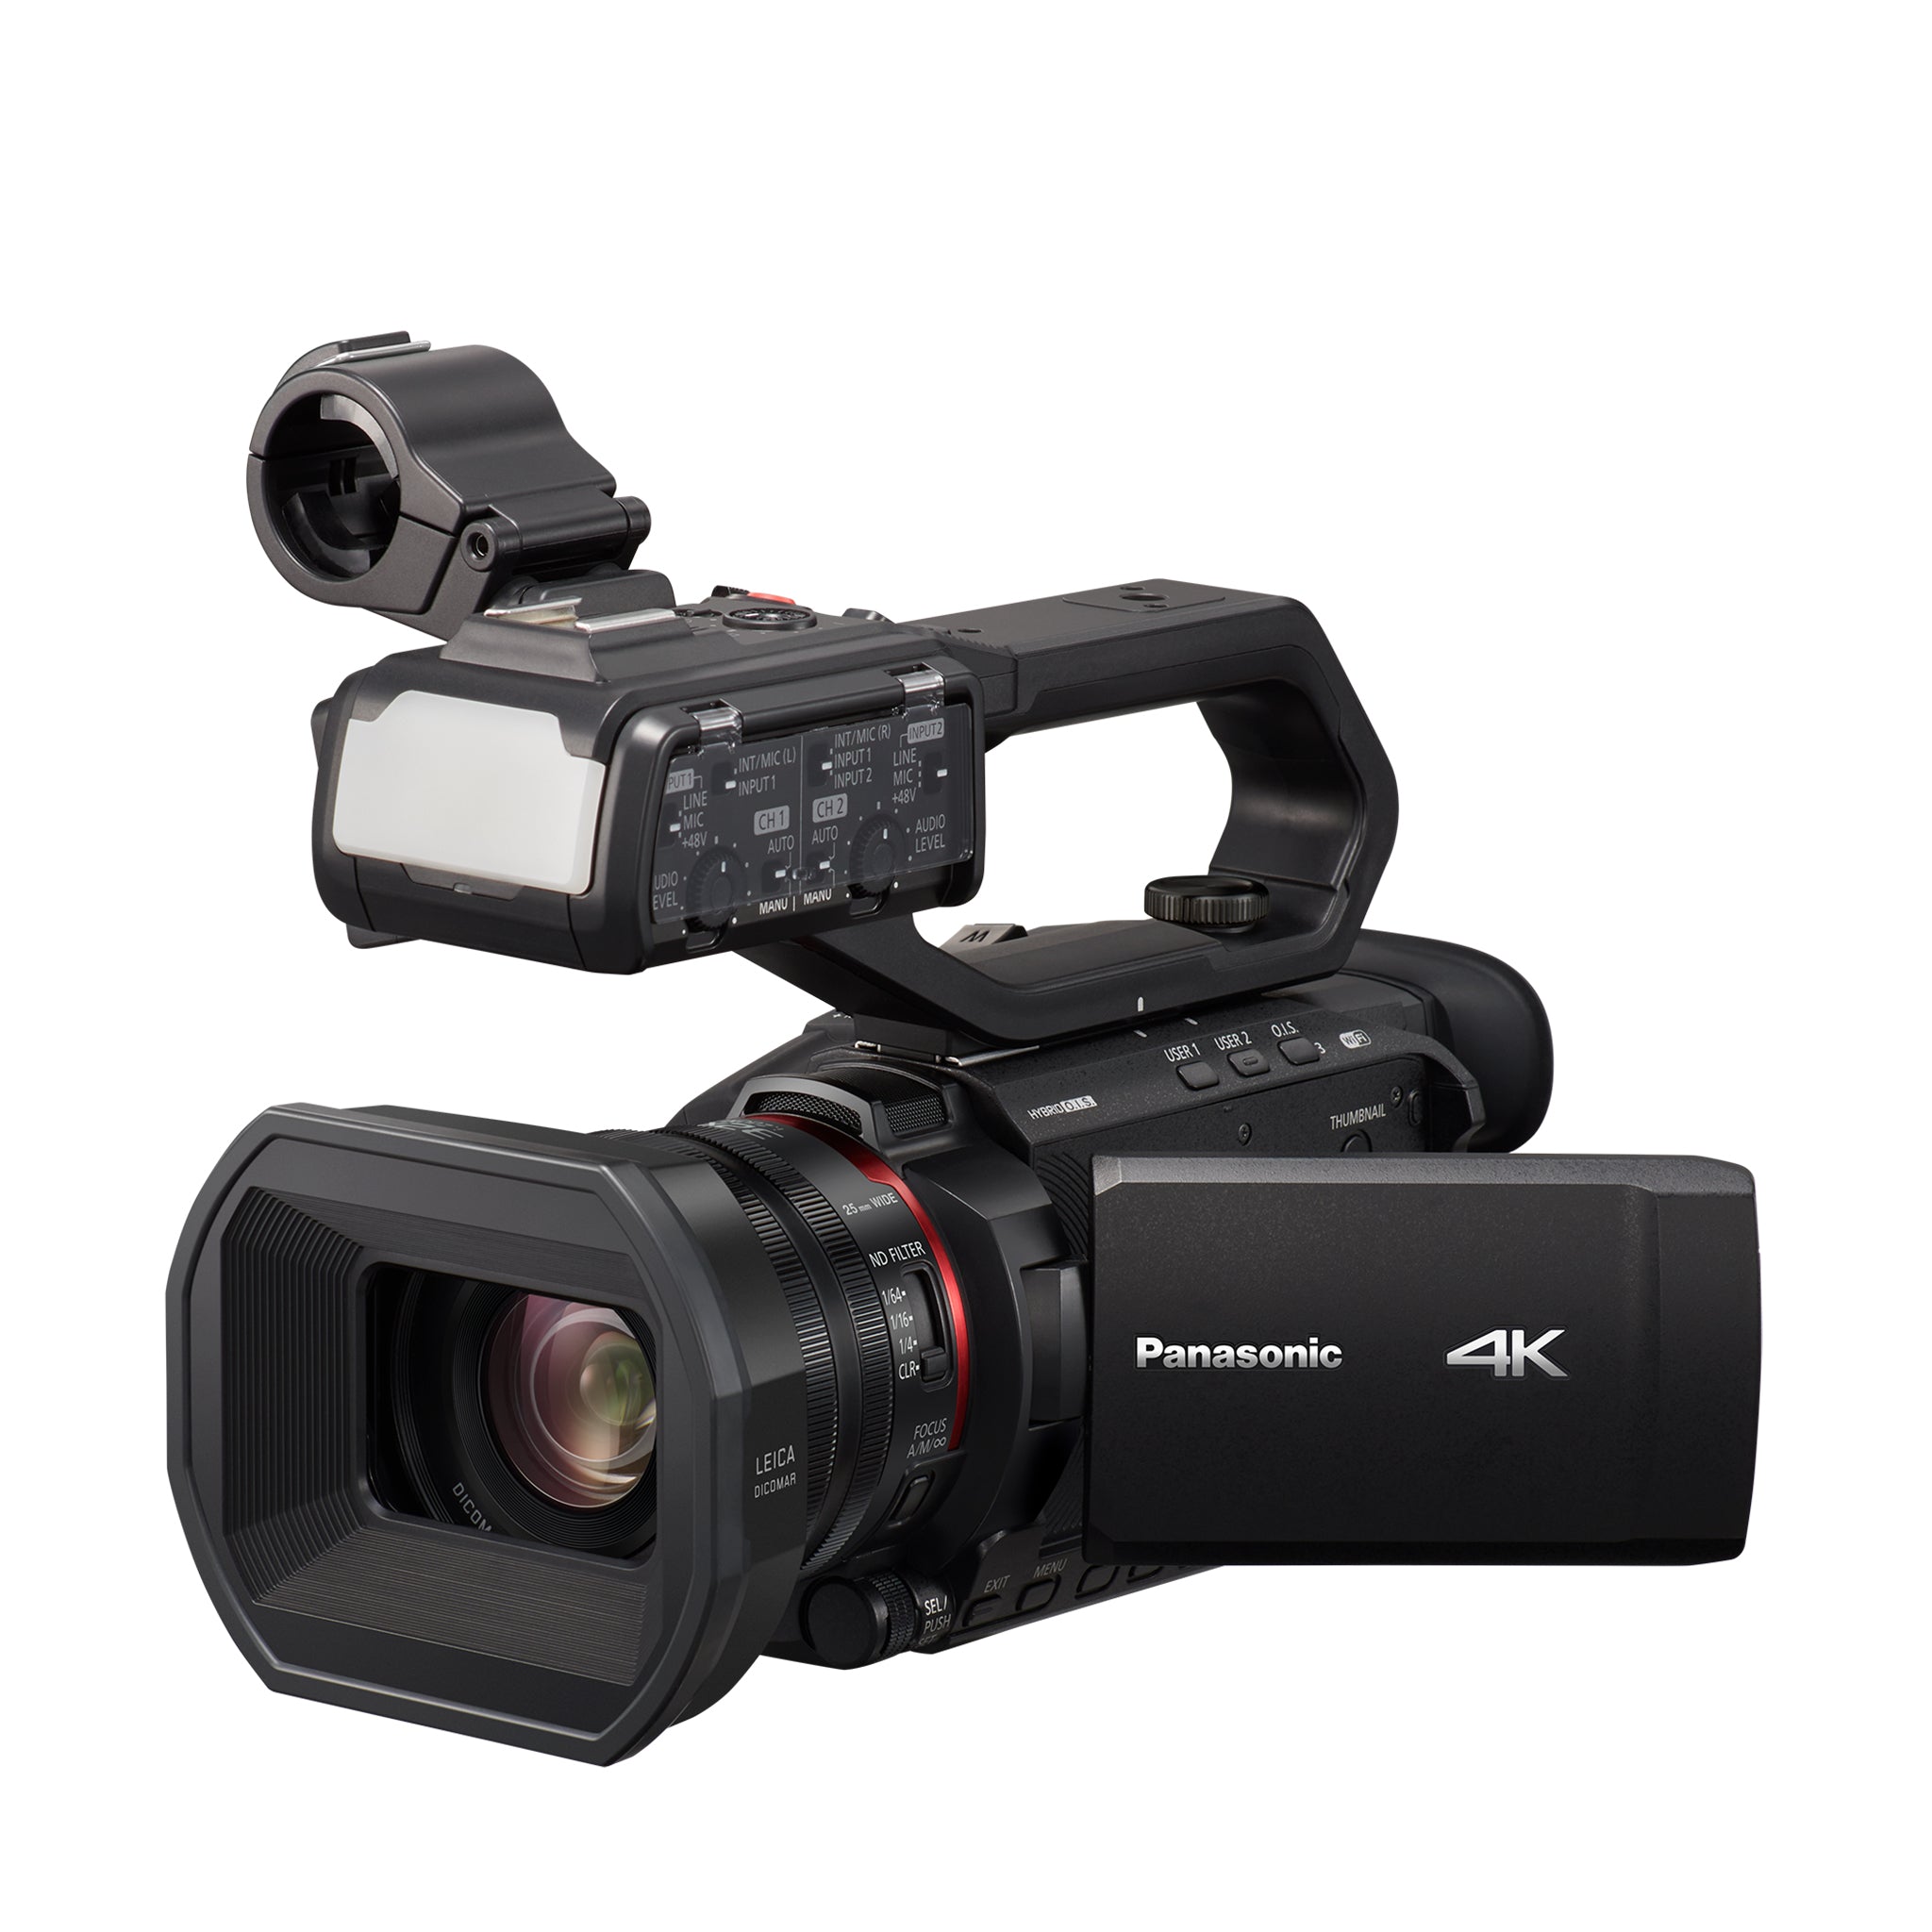 4K Professional Camcorder 24X Optical Zoom, Live Streaming